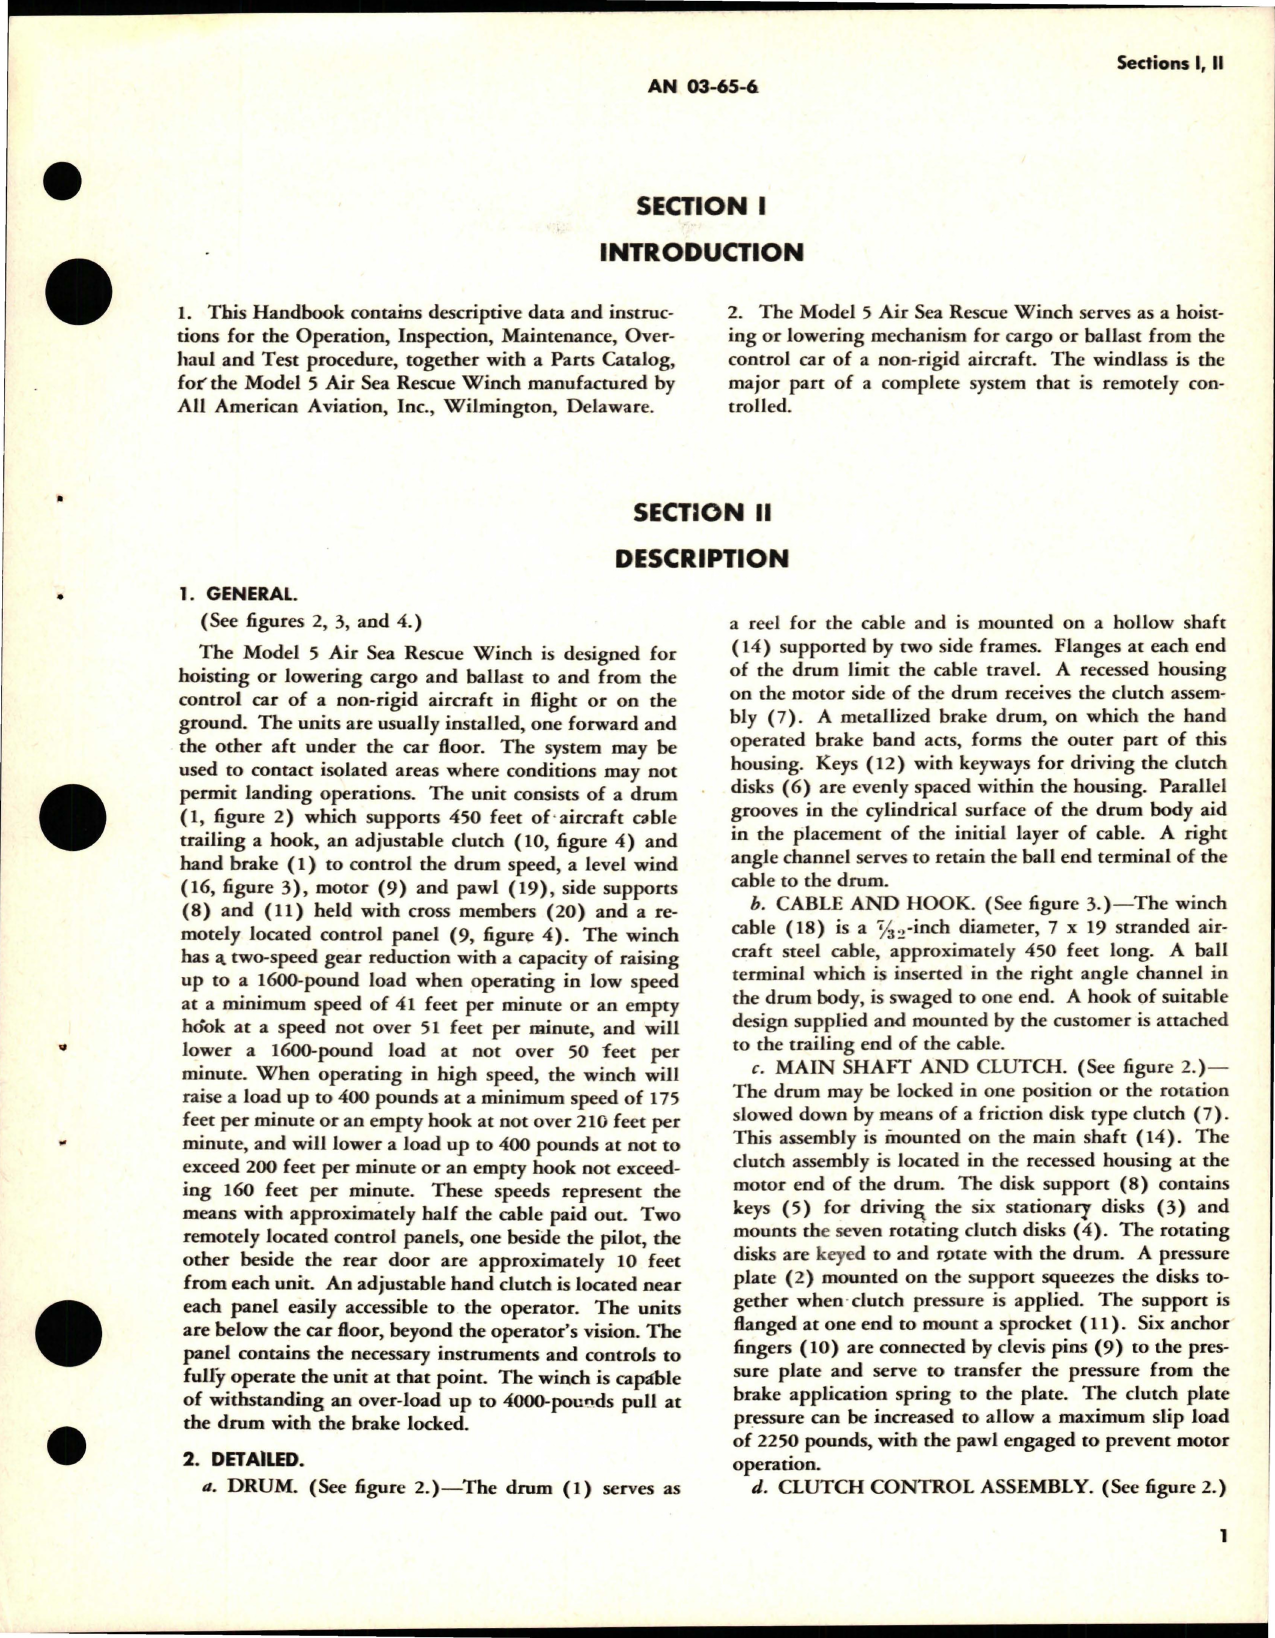 Sample page 5 from AirCorps Library document: Operation, Service and Overhaul Instructions with Parts Catalog for Air Sea Rescue Winch - Model 5